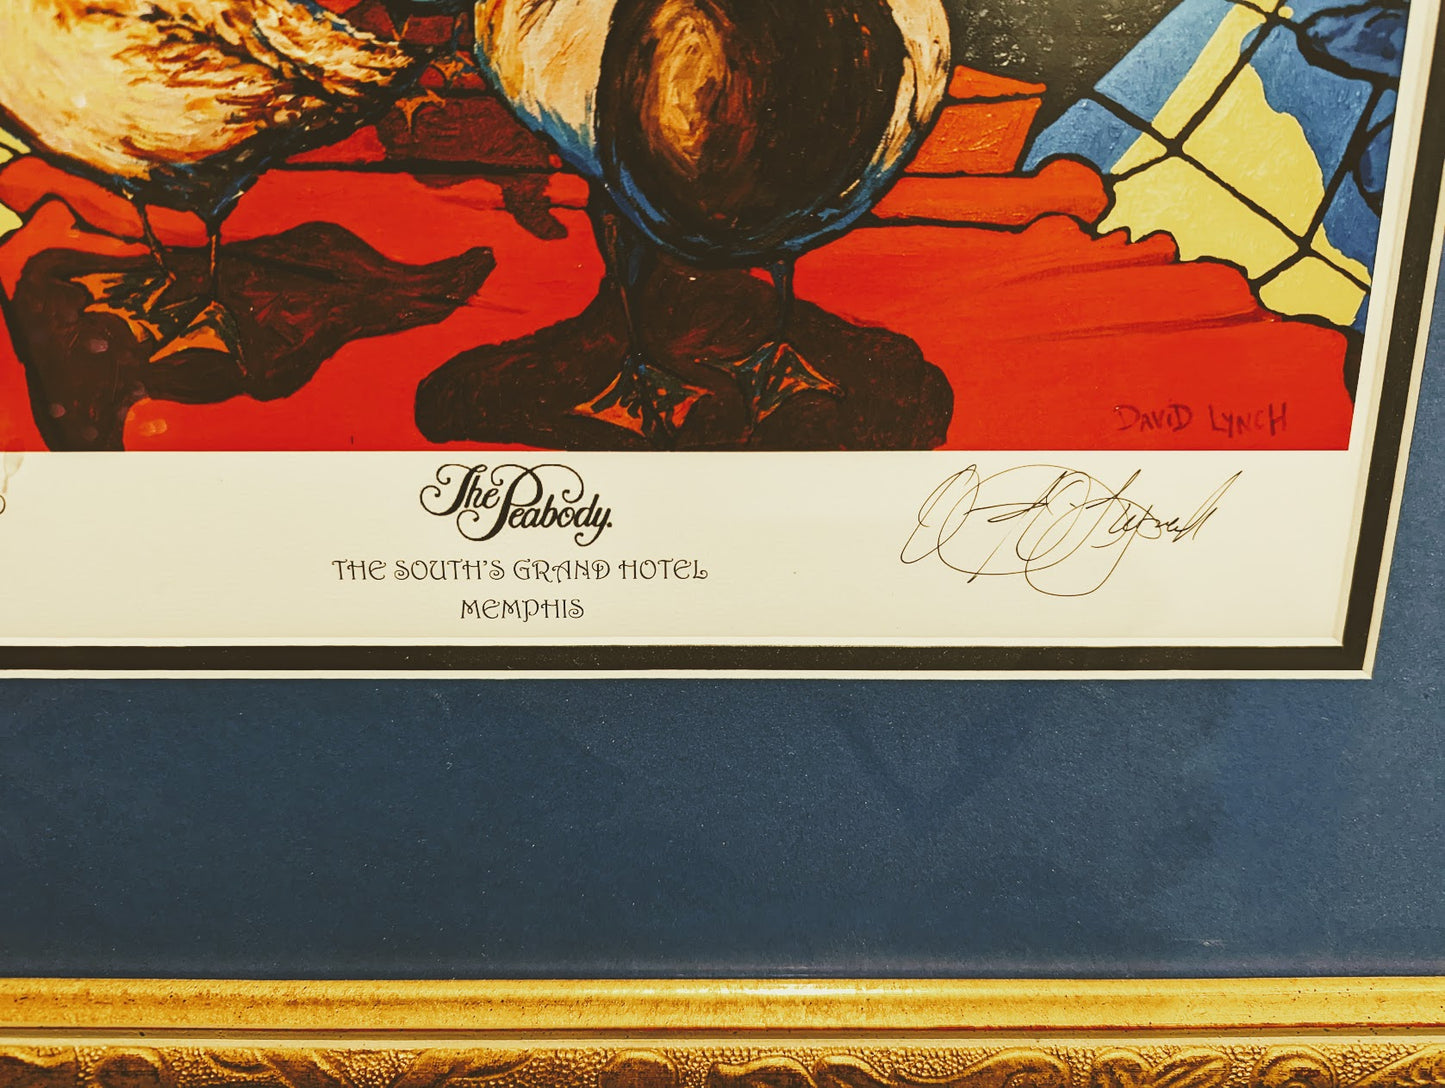 "The Peabody Ducks" Signed & Numbered Lithograph by David Lynch